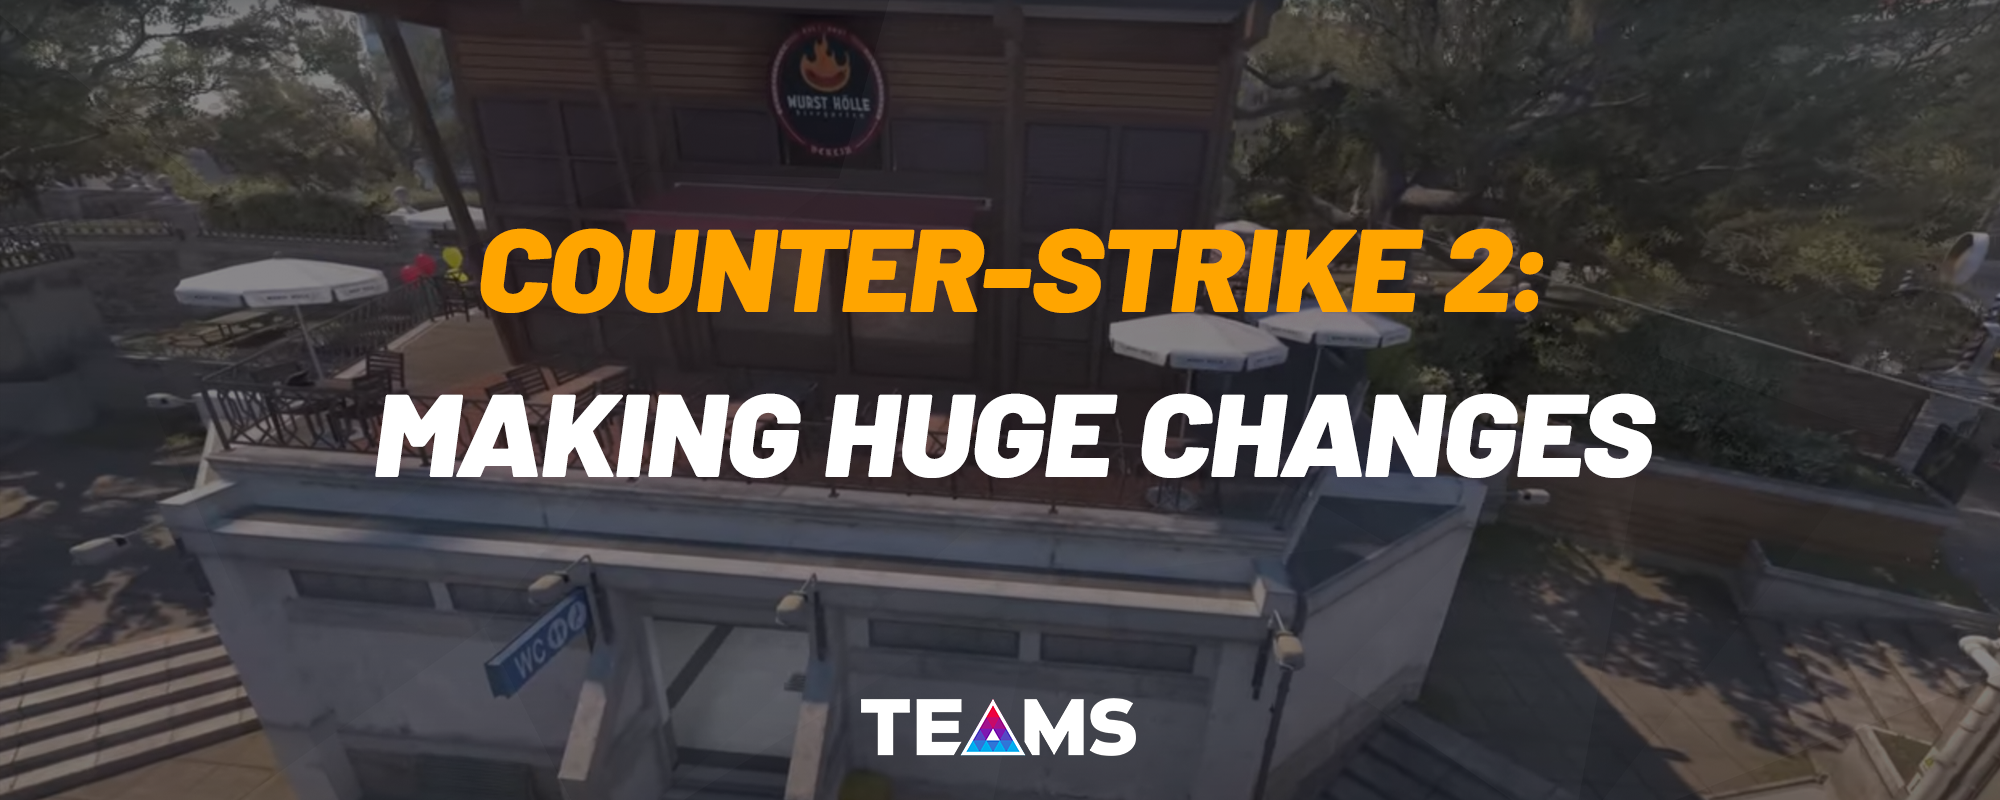 Counter-Strike 2 New Insights from Valve